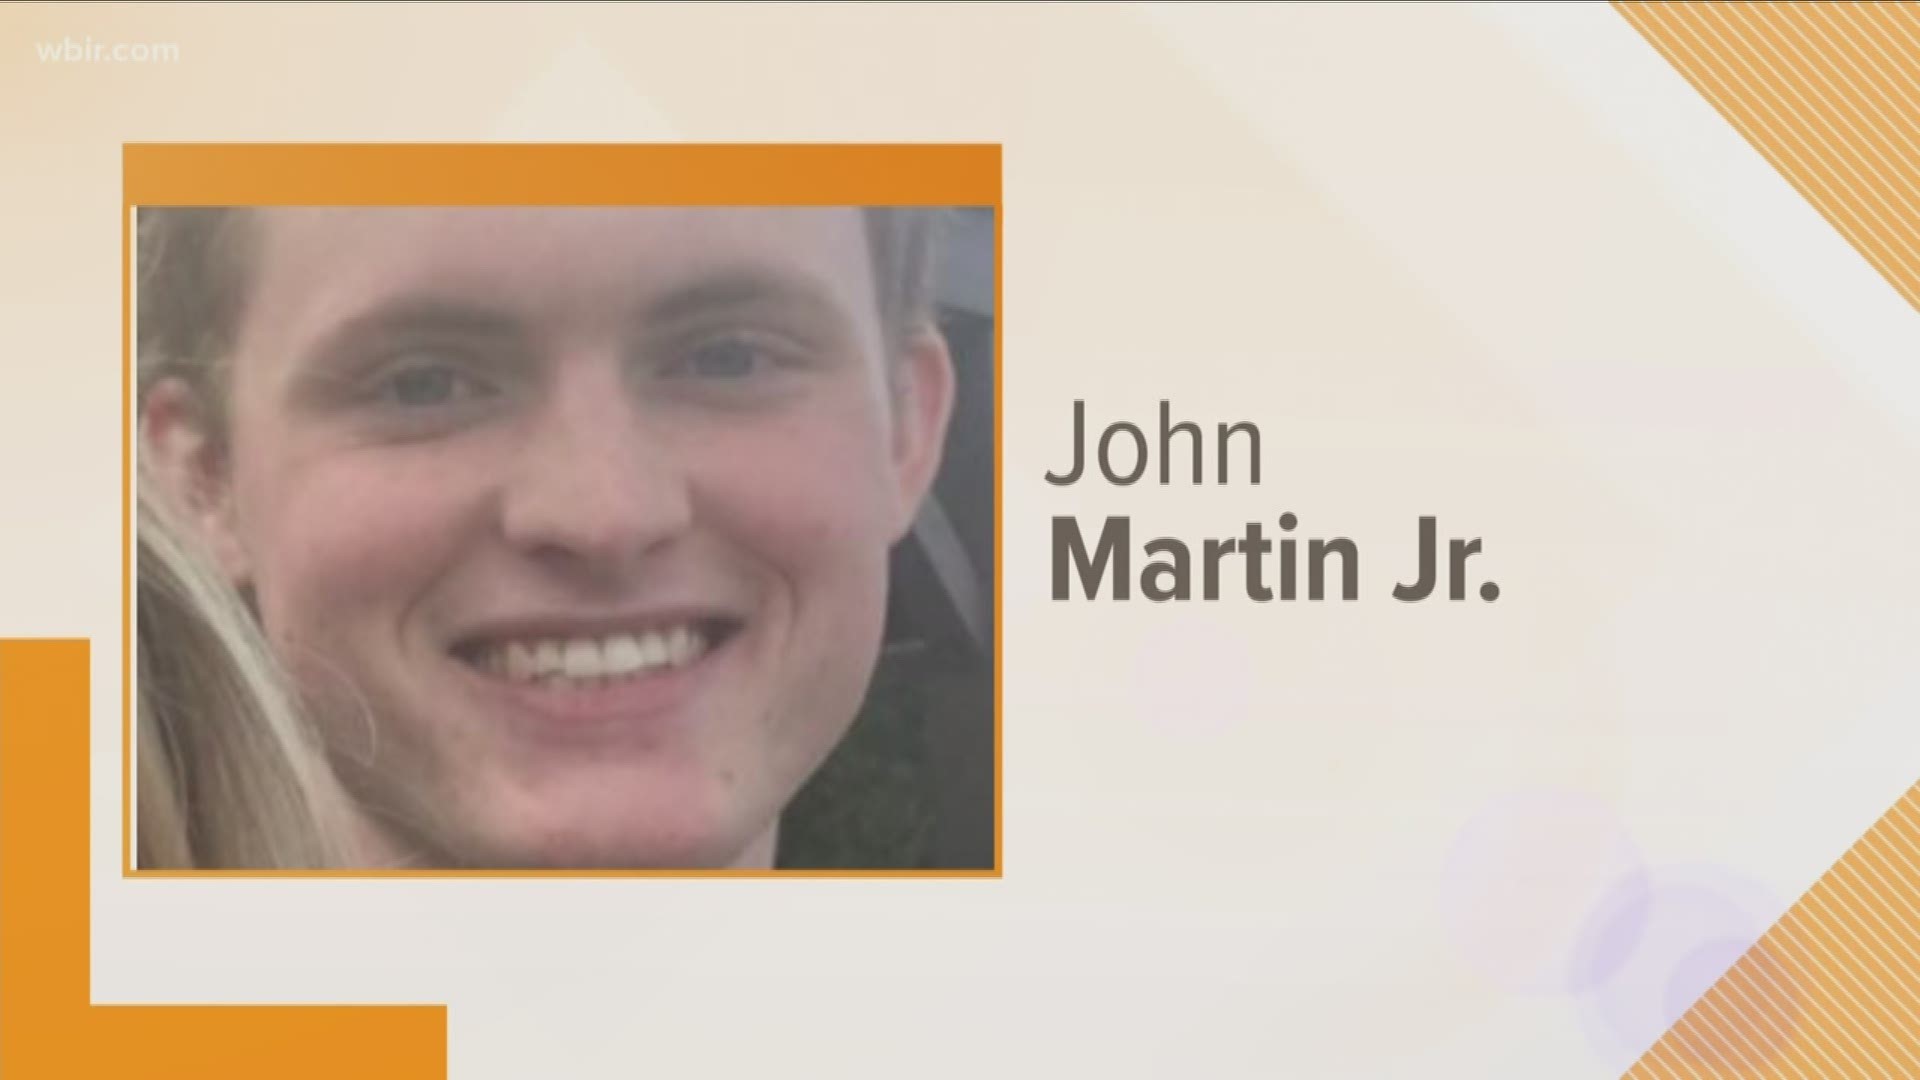 John Martin, Jr. was found dead in his car outside a Sevier County cabin. Officials do not suspect foul play.